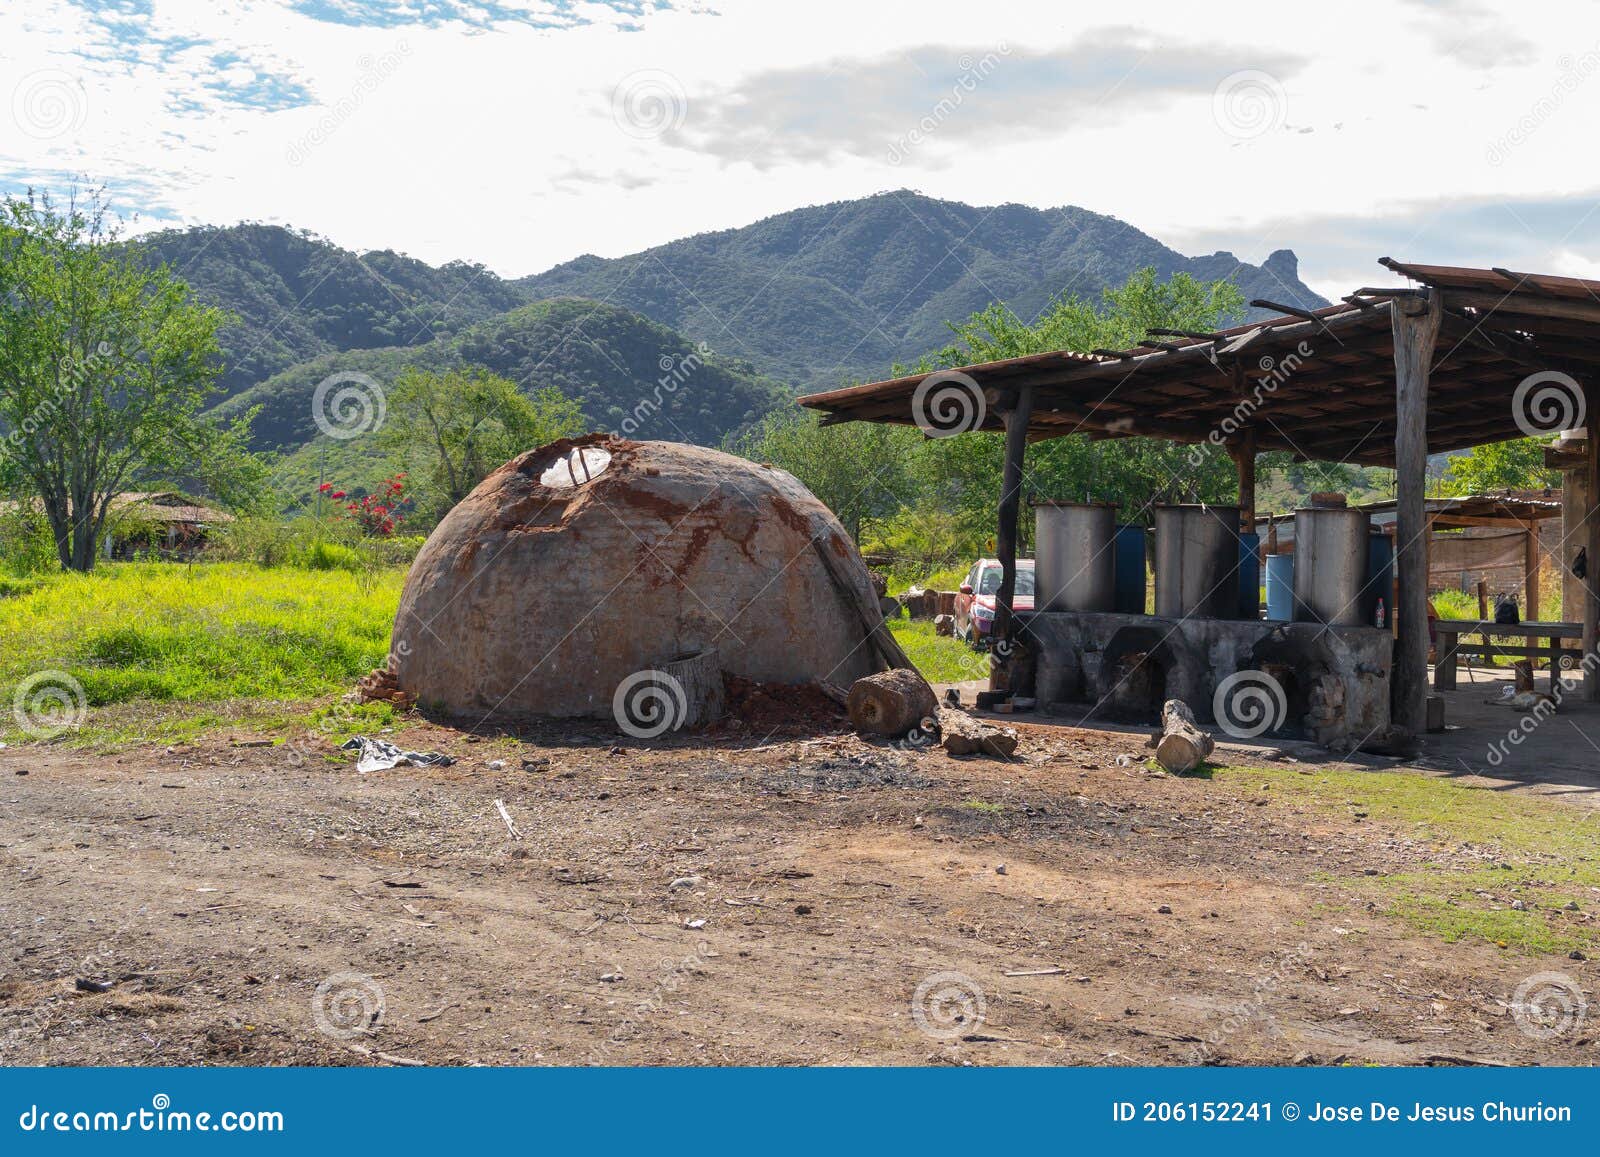 artisan oven in the field to make tequila and raicilla.